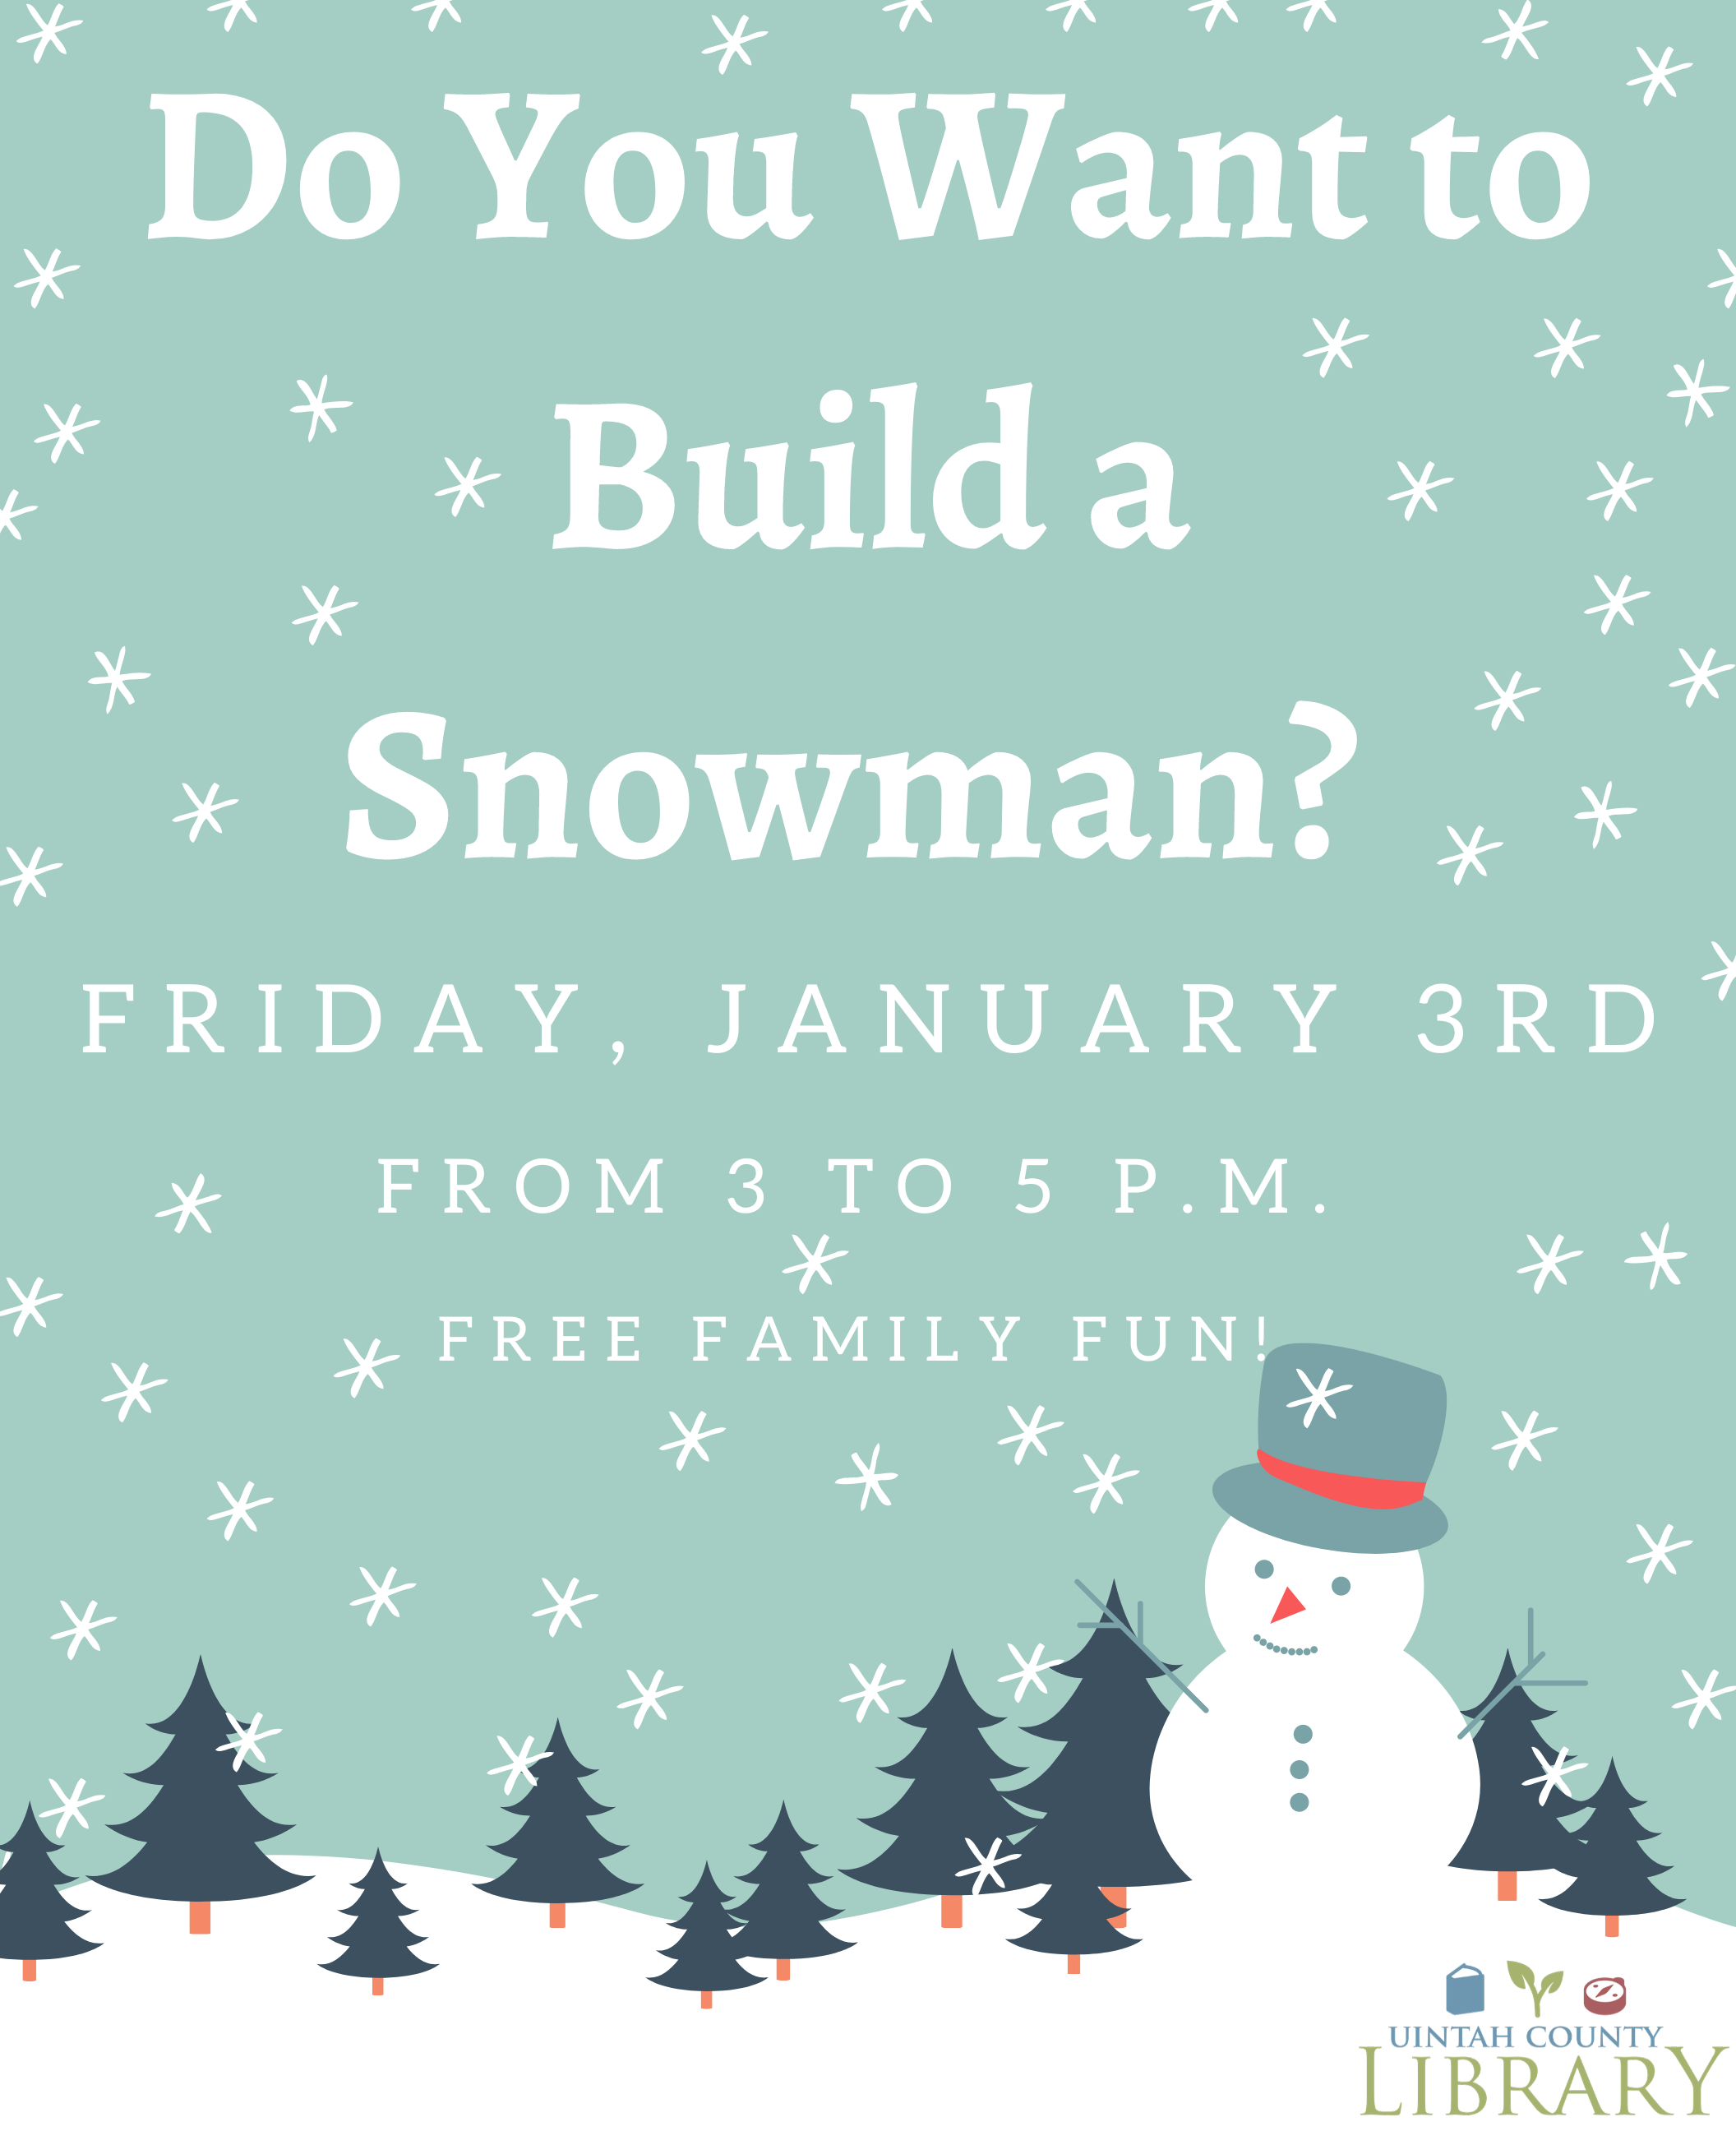 Do You Want to Build a Snowman? Friday, January 3rd from 3 to 5 p.m. free family fun